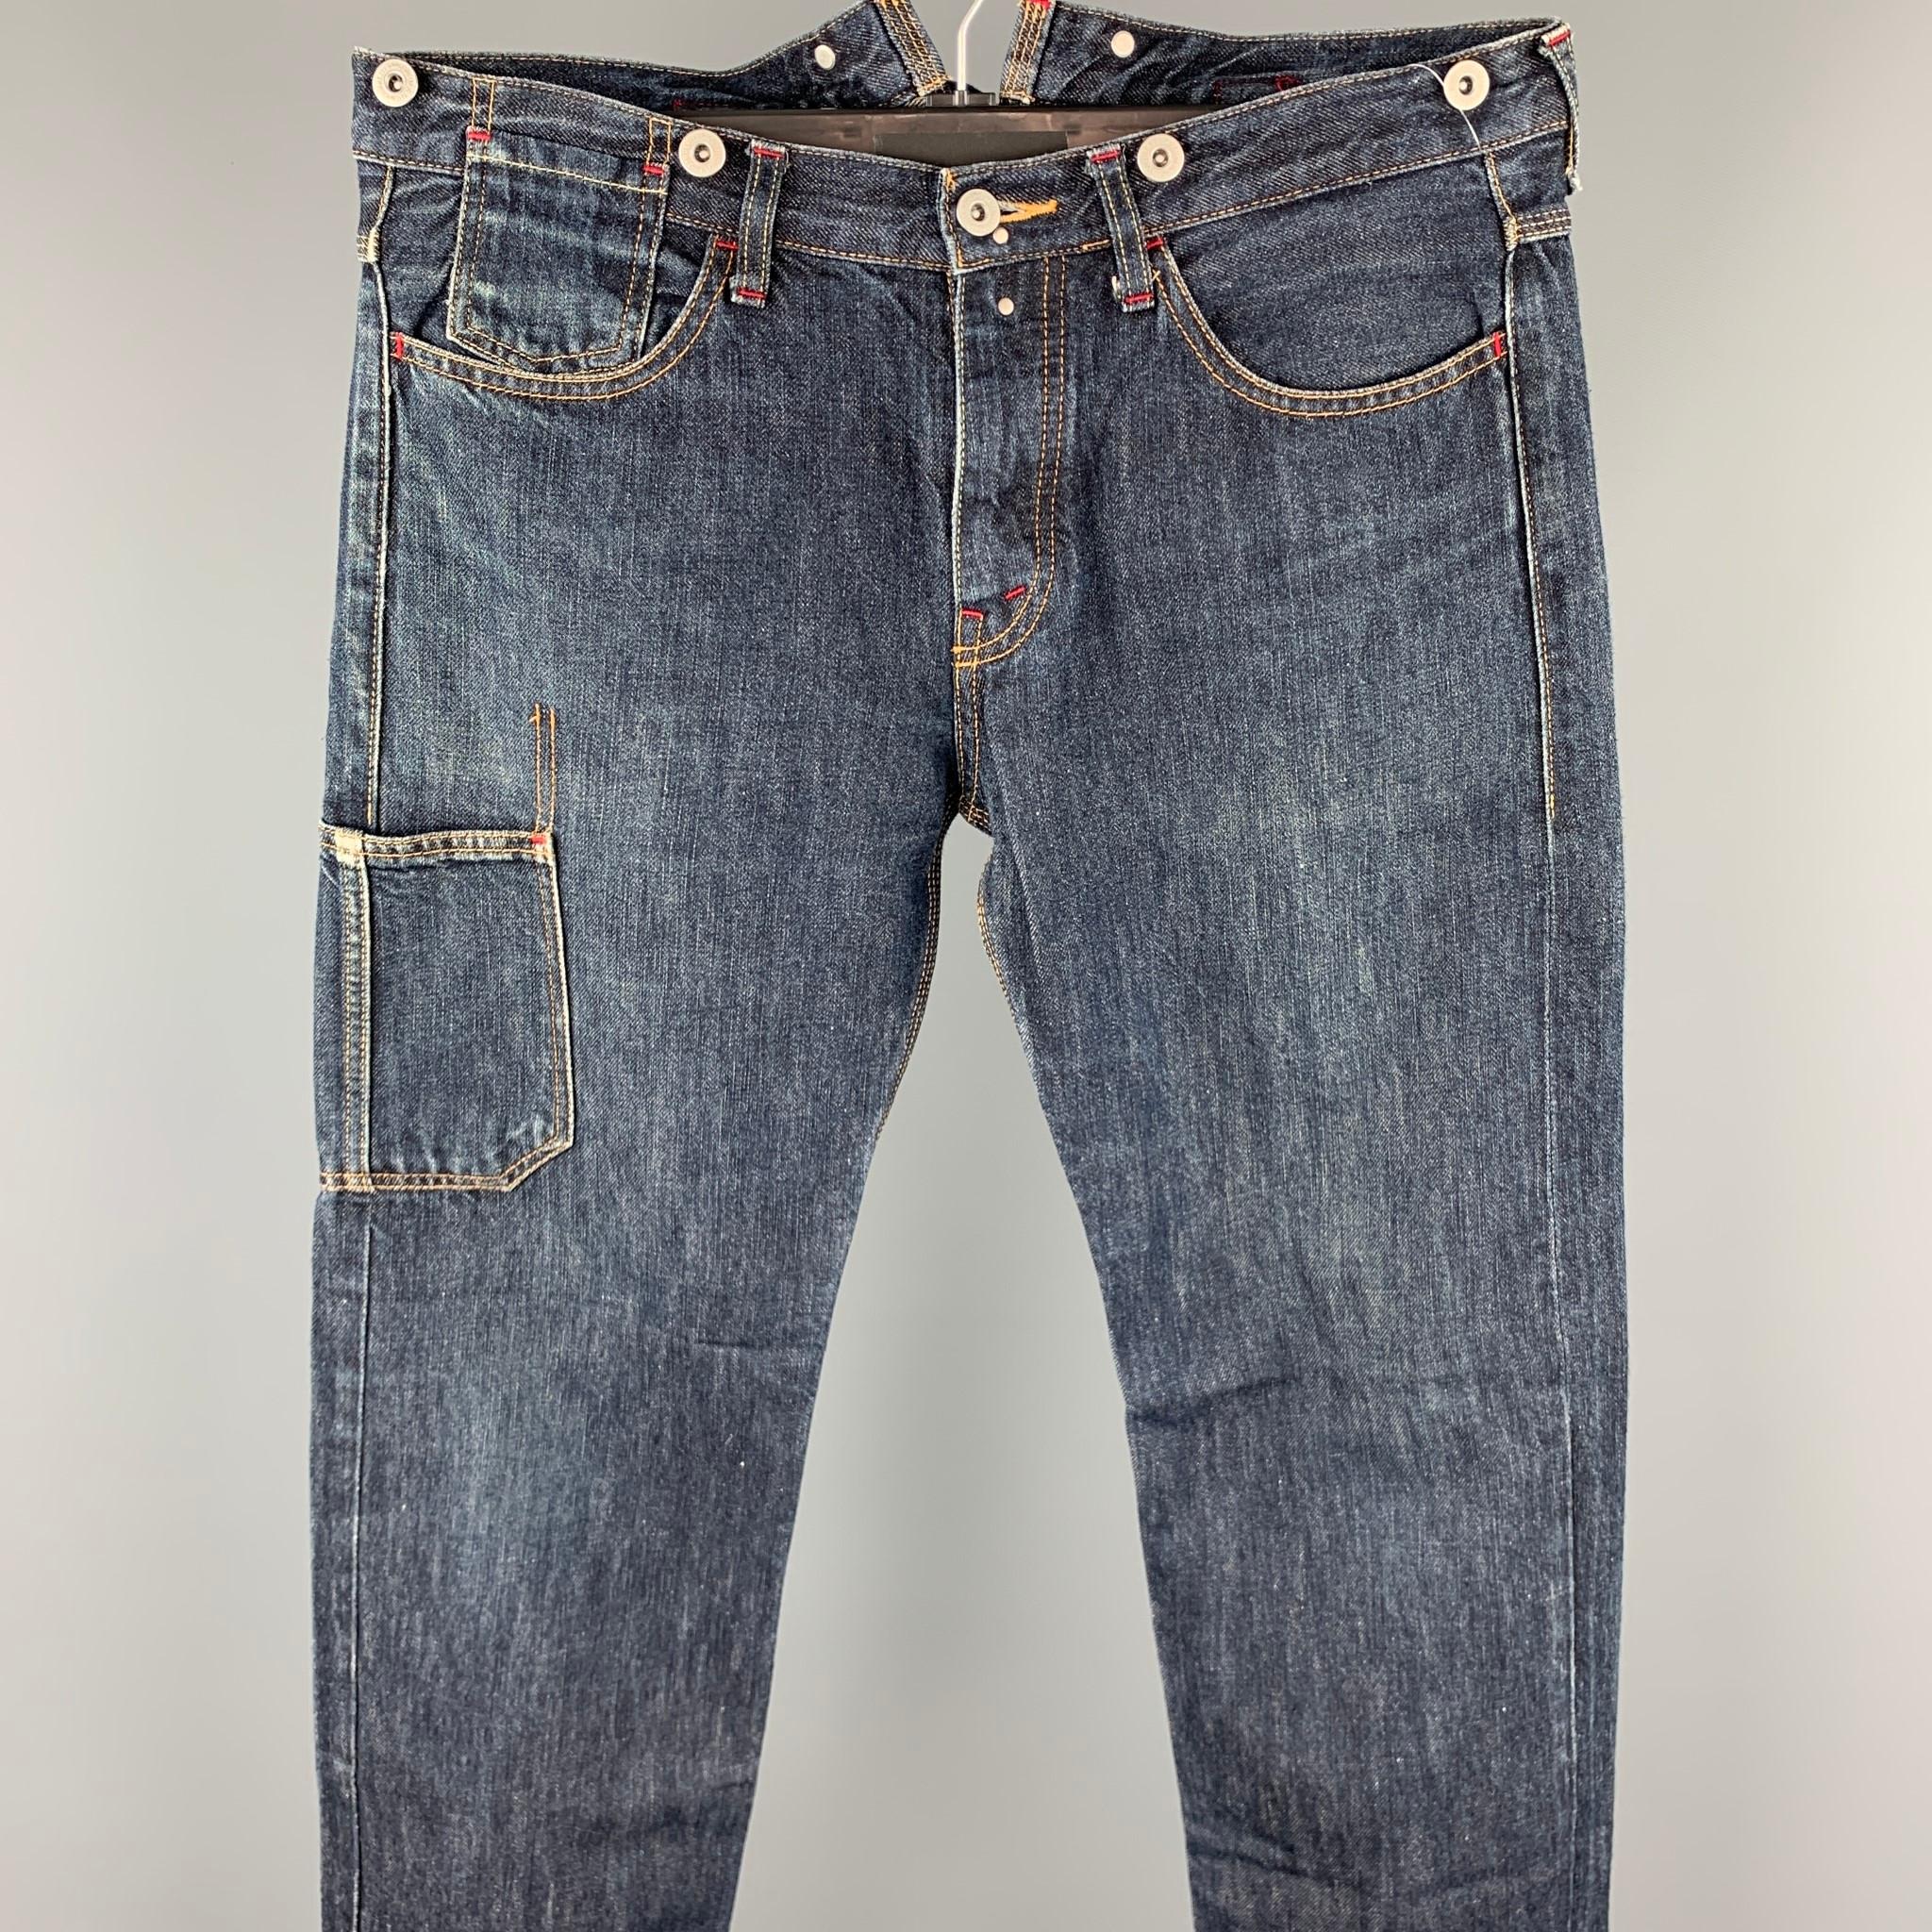 JUNYA WATANABE jeans comes in a indigo denim with contrast stitching featuring a straight leg, front pocket detail, back belt, and a button fly closure. Minor wear. Made in Japan.

Good Pre-Owned Condition.
Marked: L / AD2007

Measurements:

Waist: